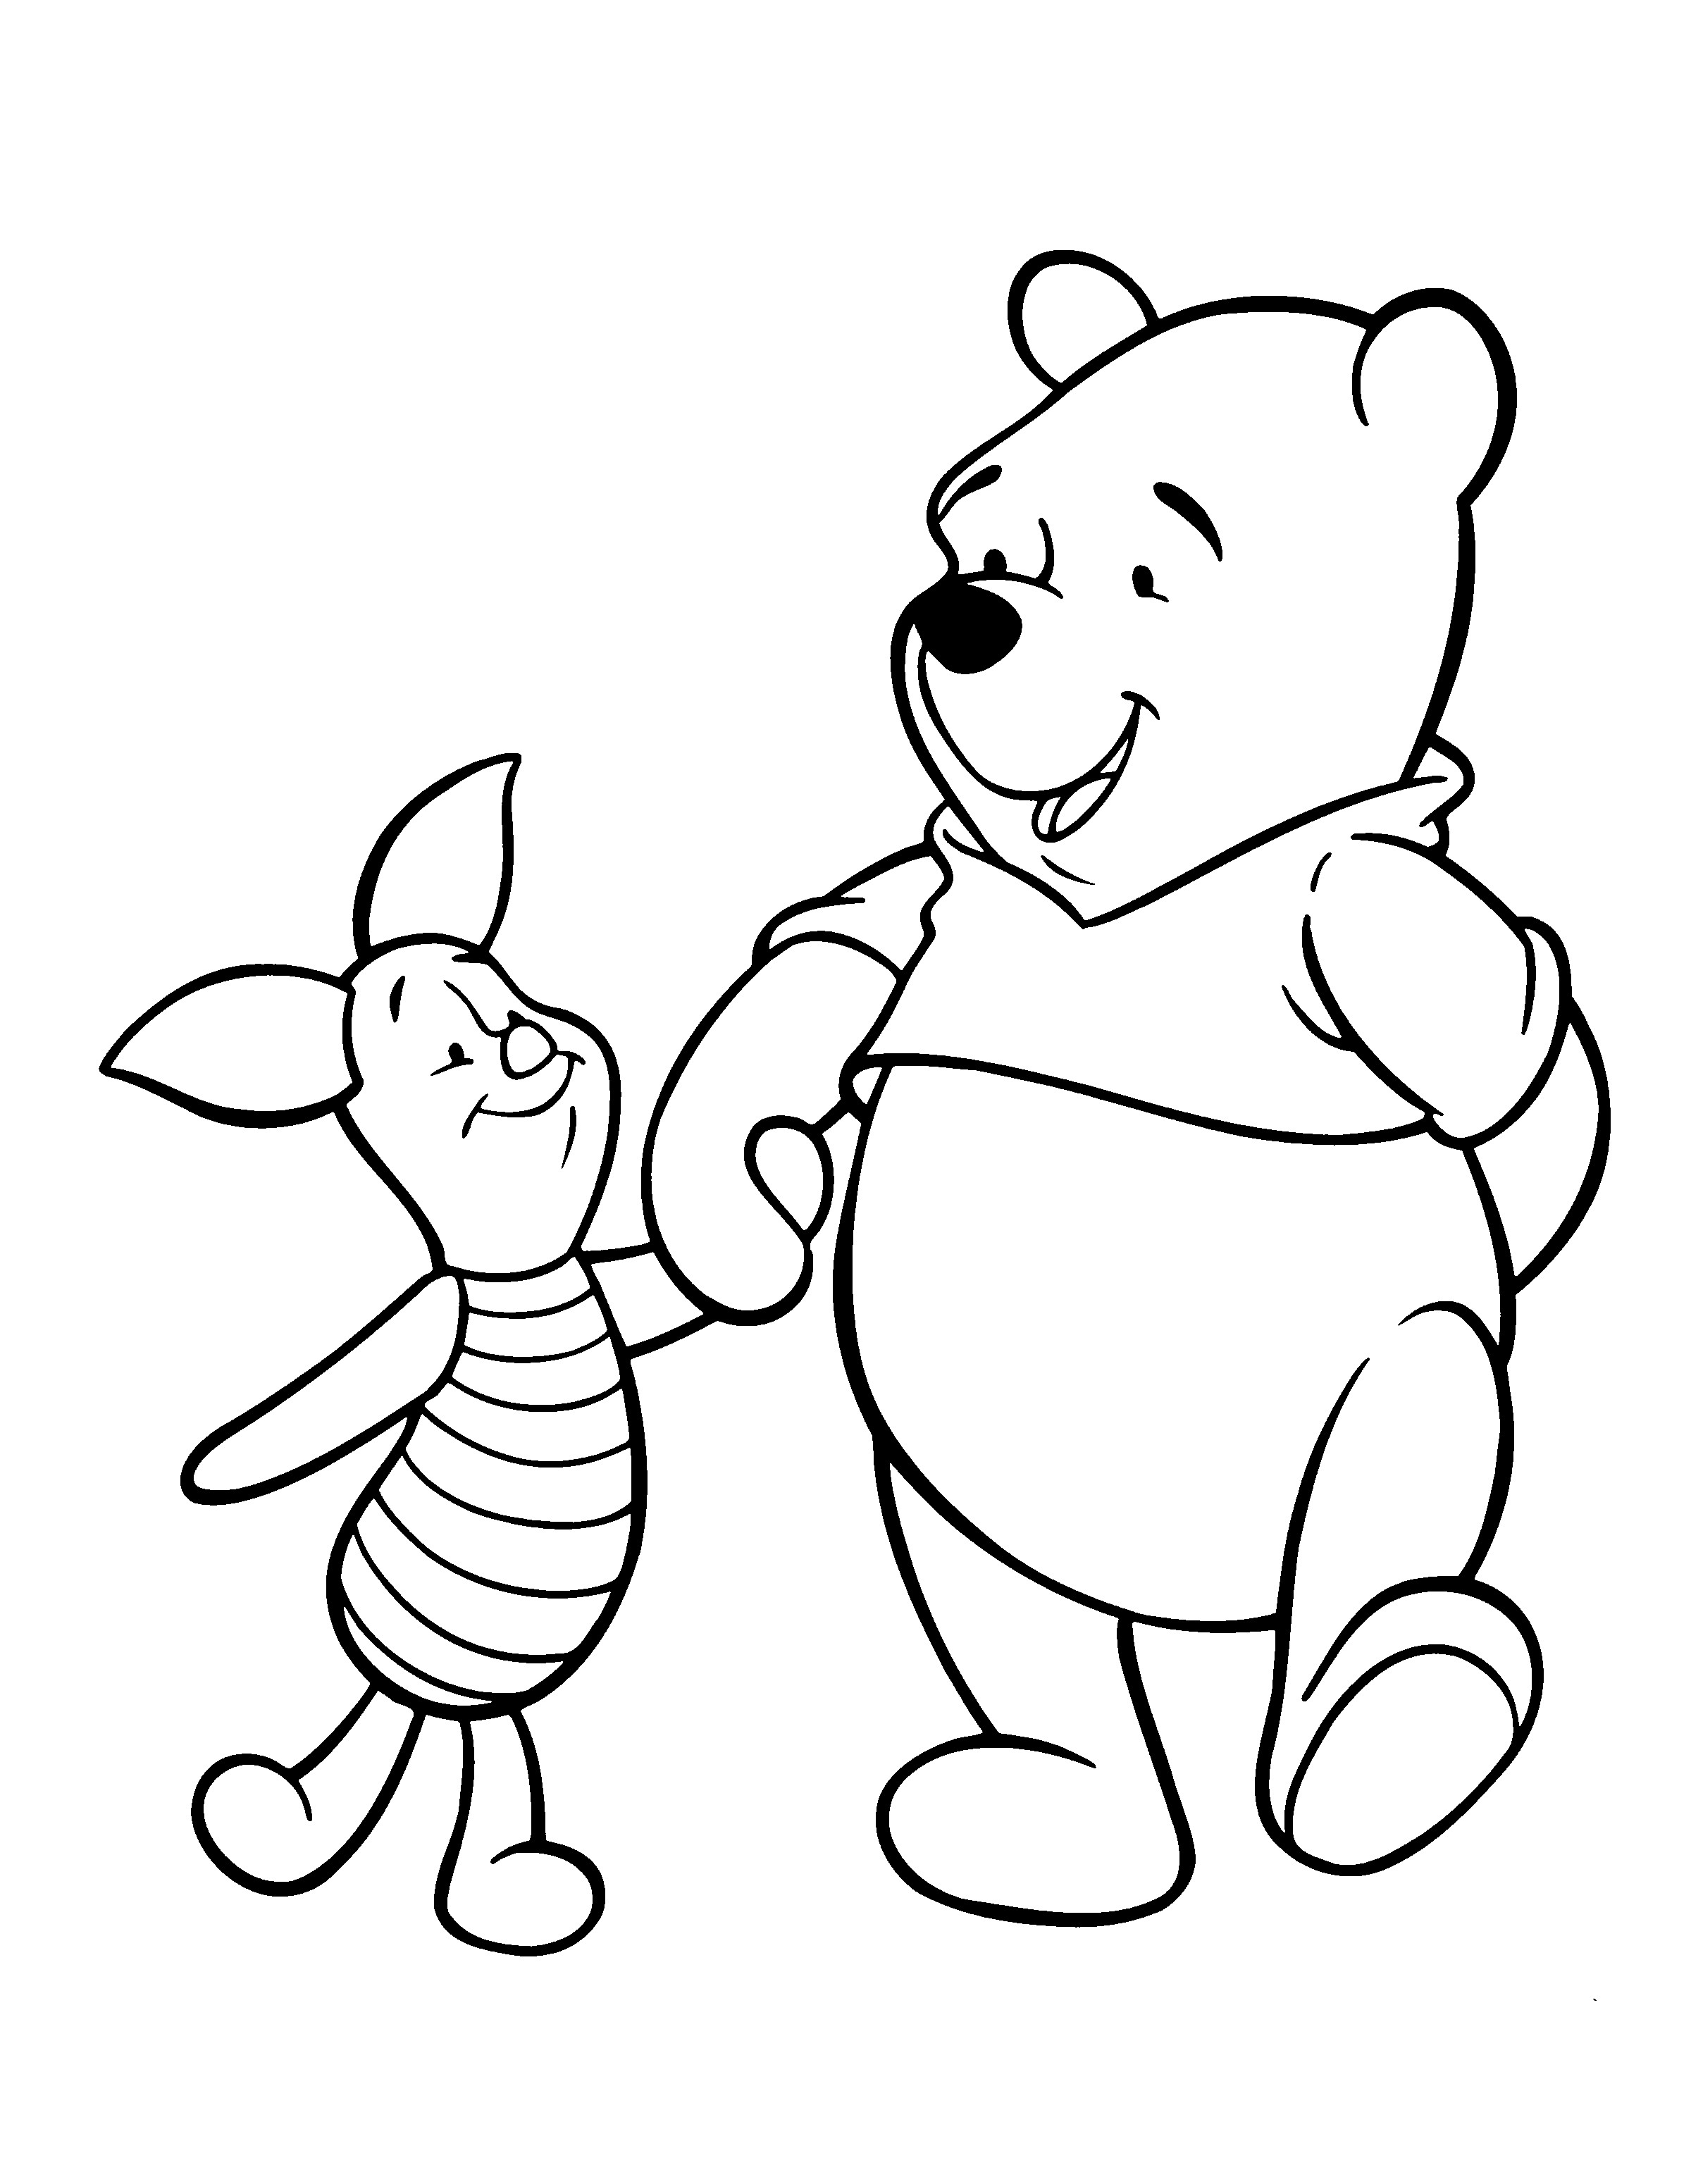 Coloring Book Pages Winnie The Pooh
 Winnie The Pooh Coloring Page Tv Series Coloring Page